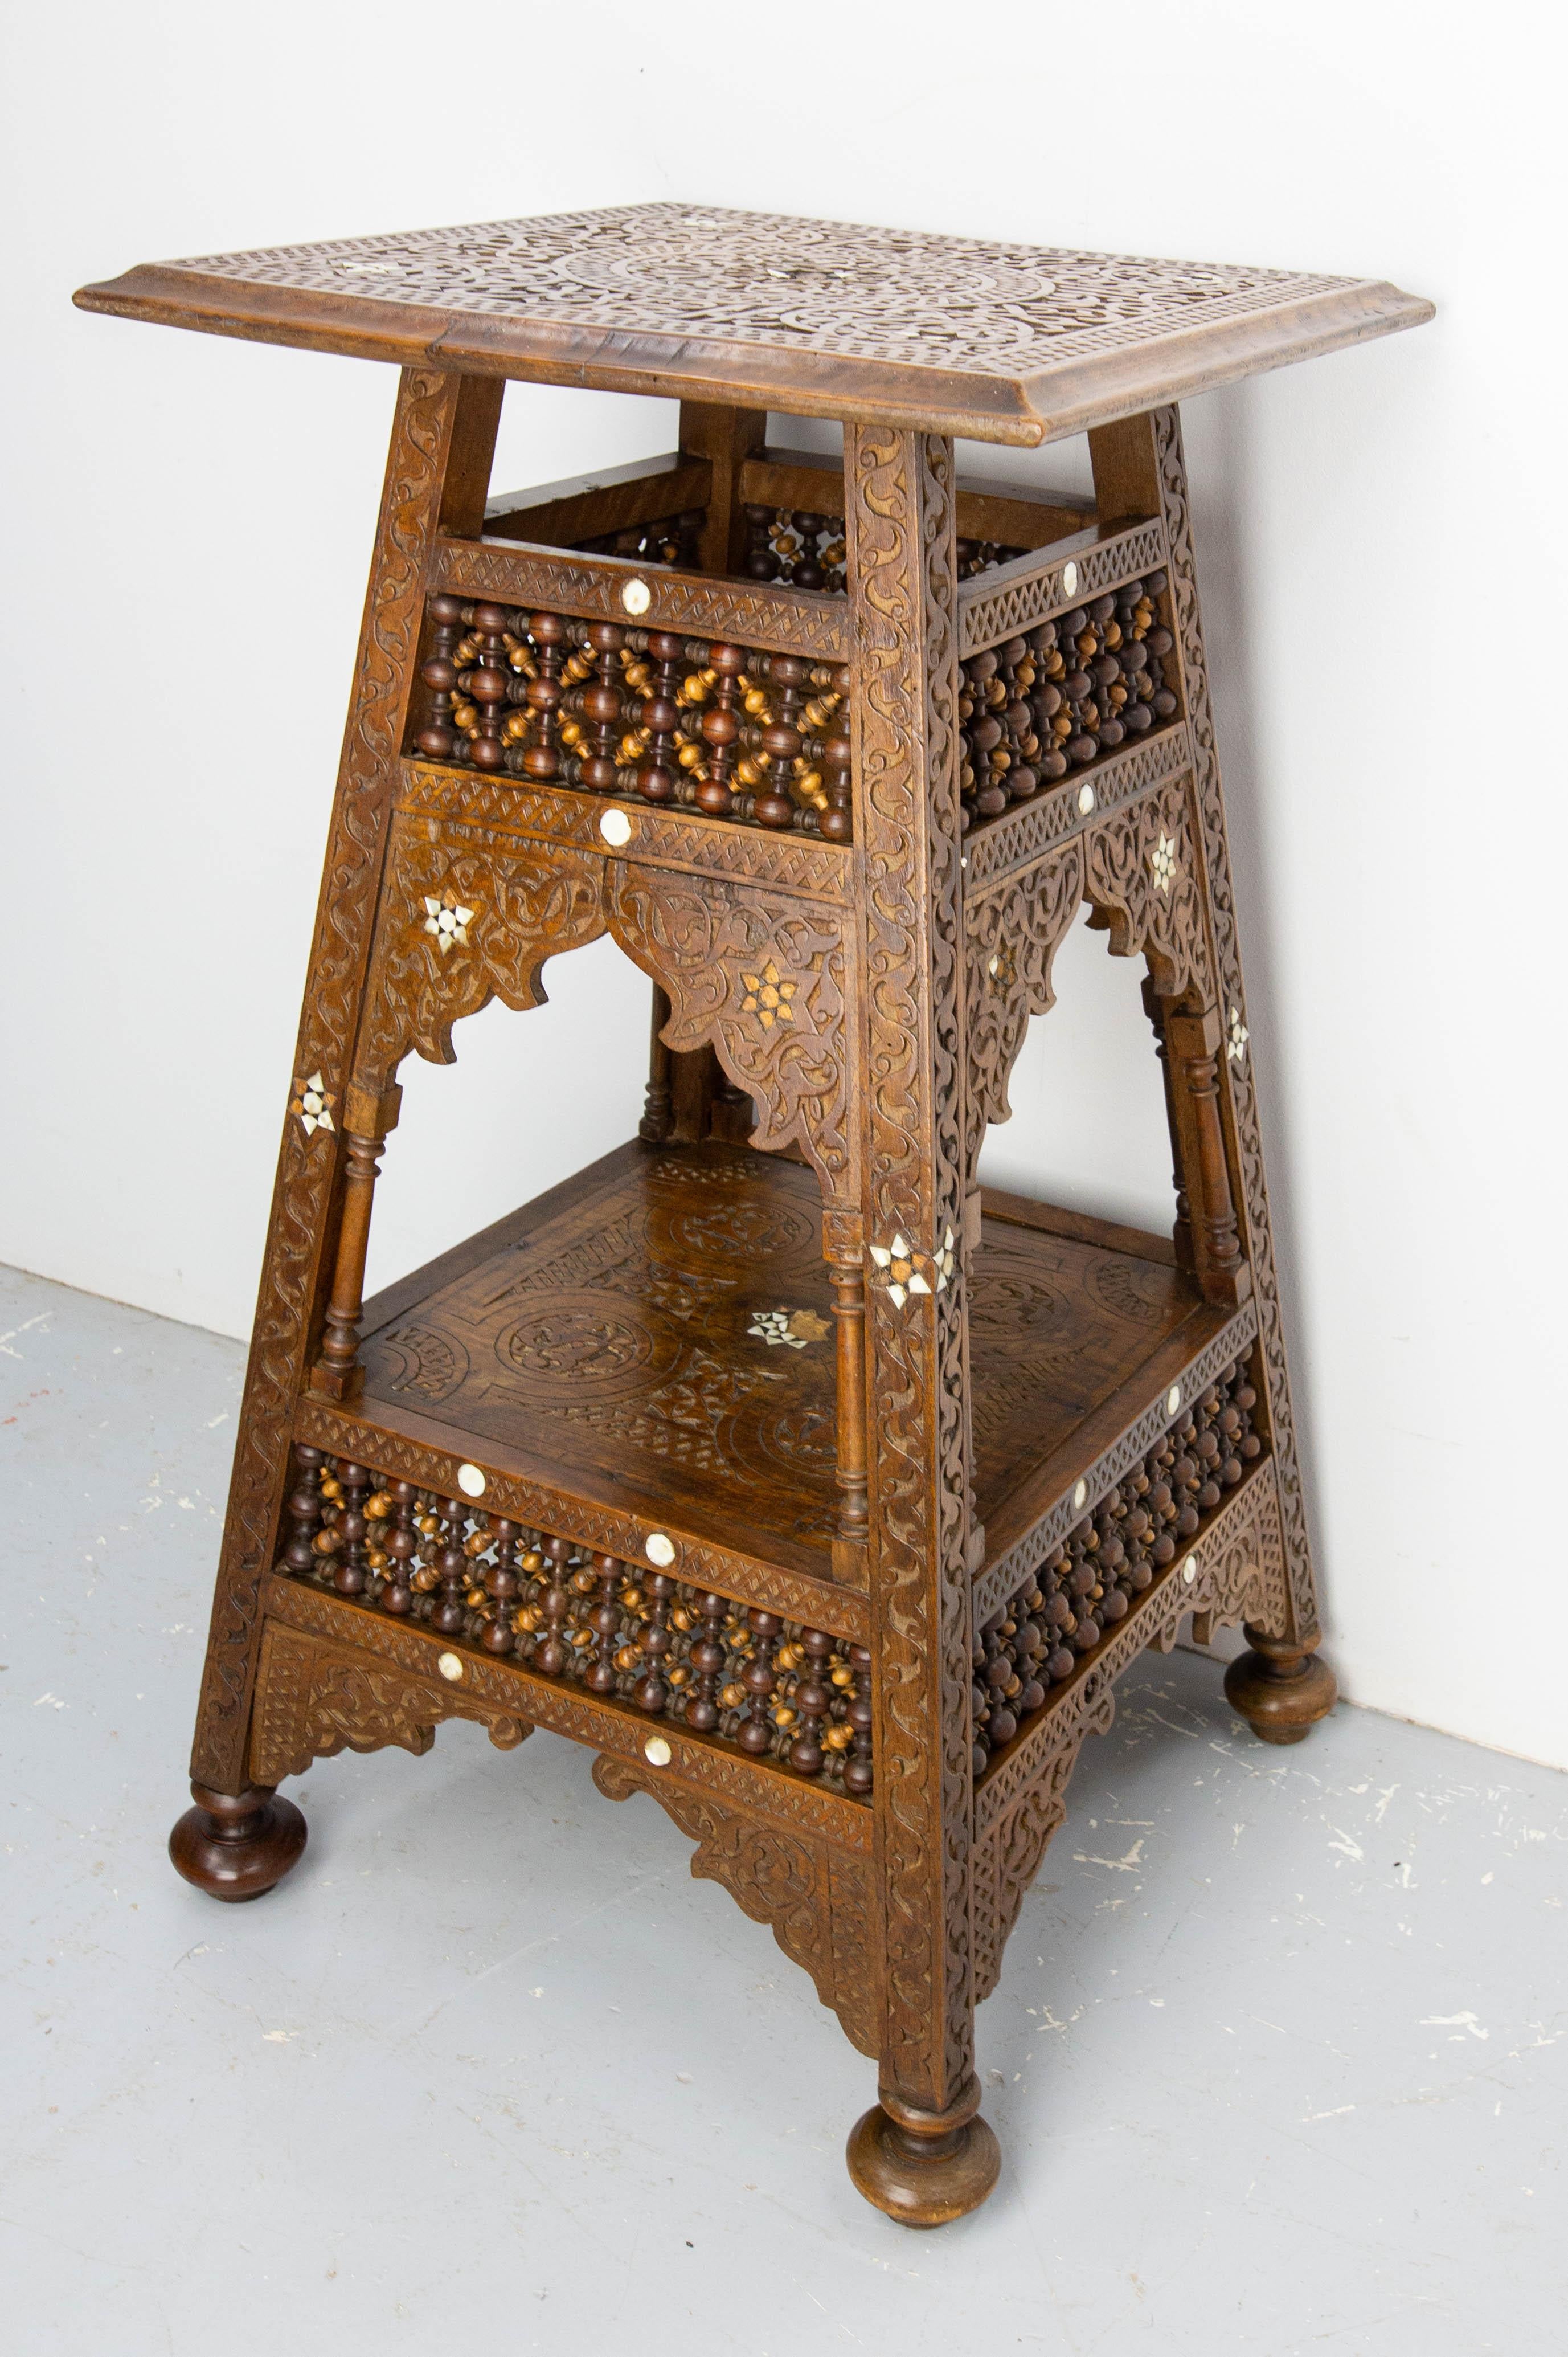 20th Century Syrian Hand-Carved & Inlaid Pedestal, early 20th century For Sale